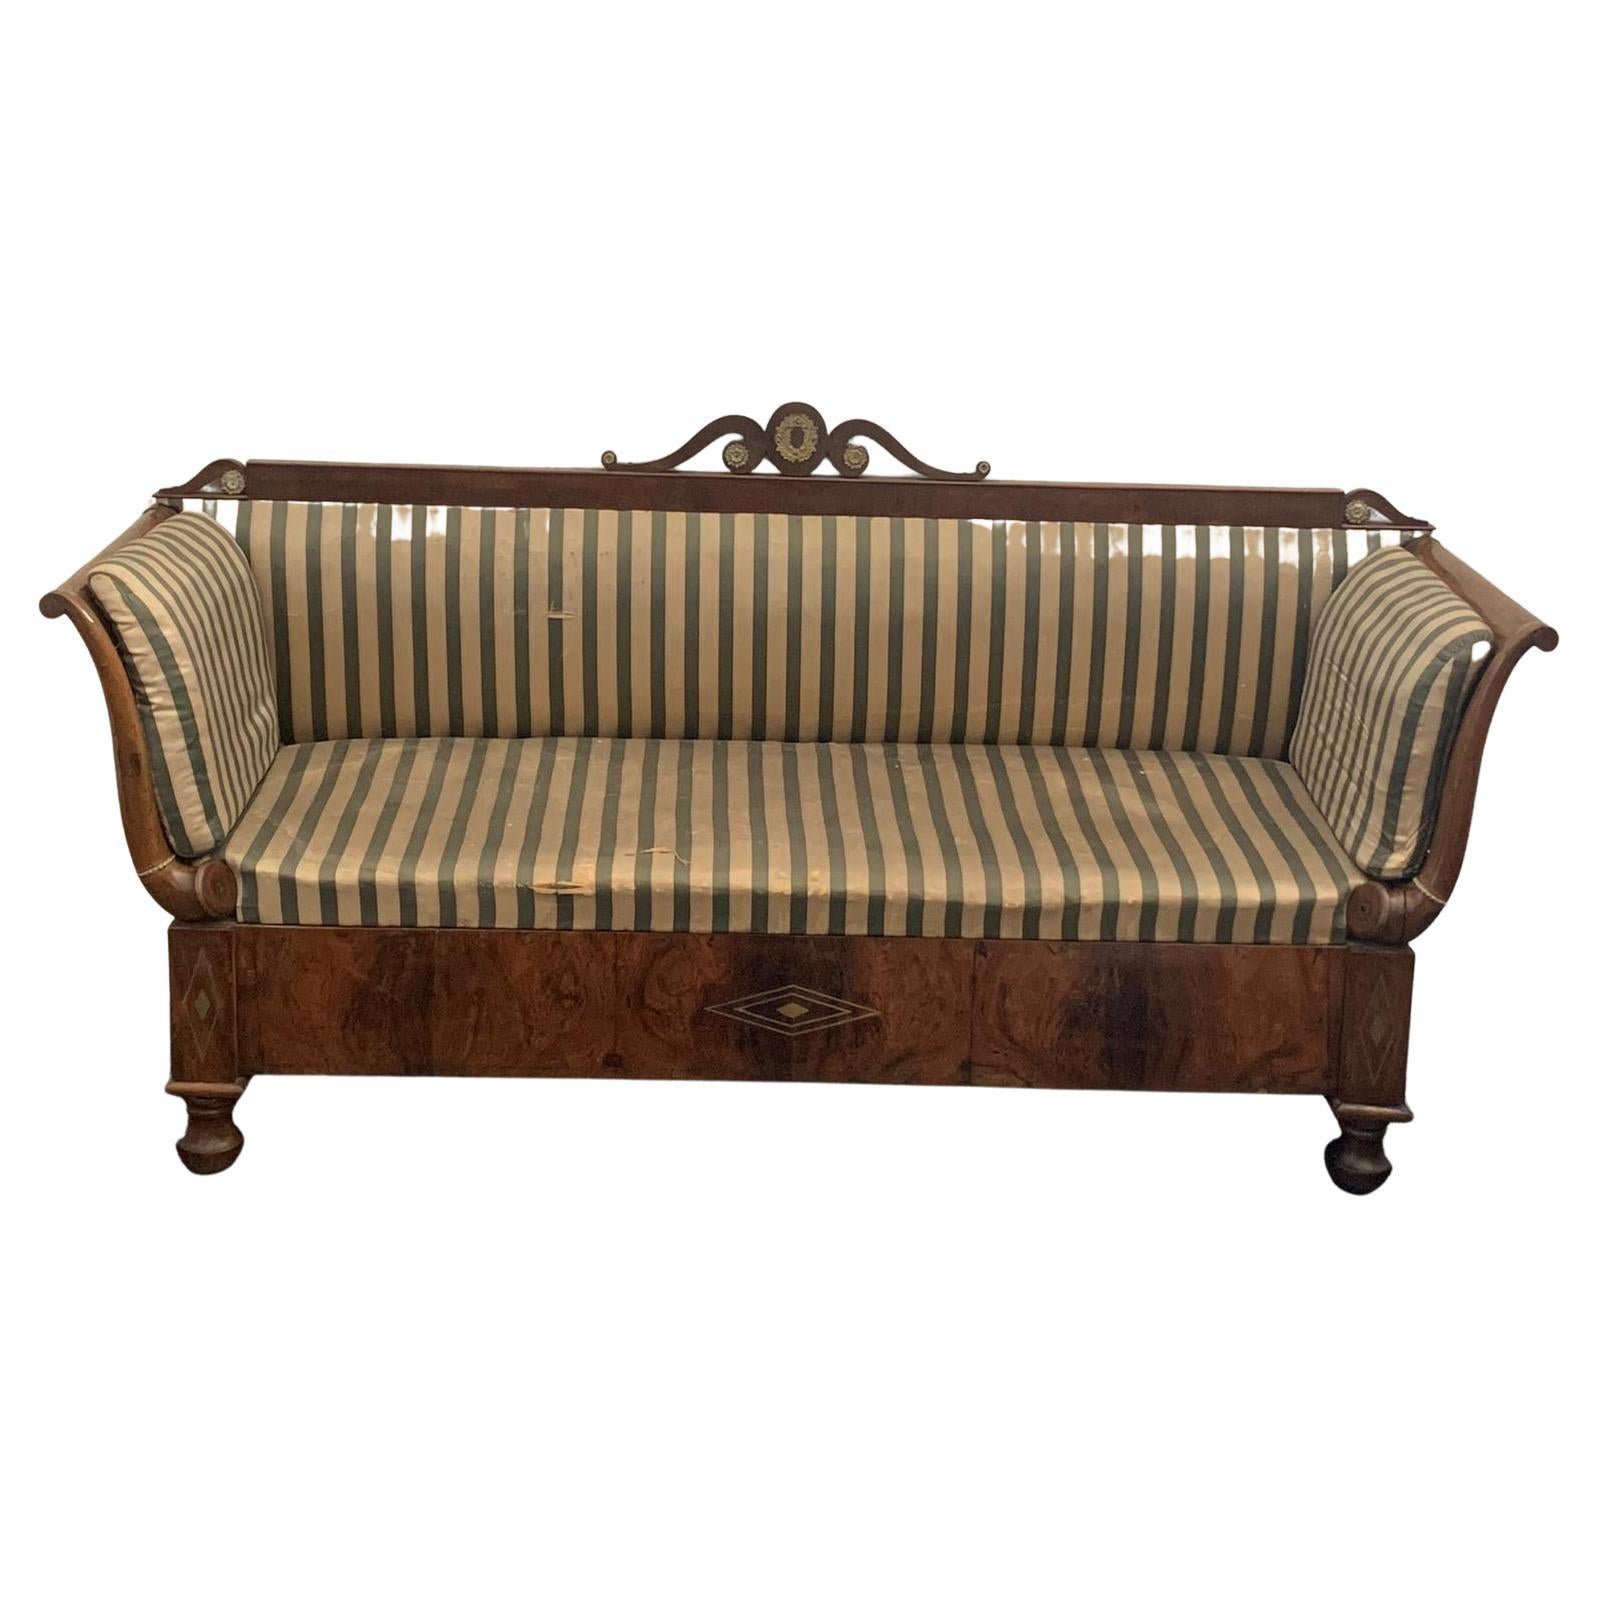 Antique Empire Charles X Inlaid Walnut & Brass Sofa, 1910s For Sale